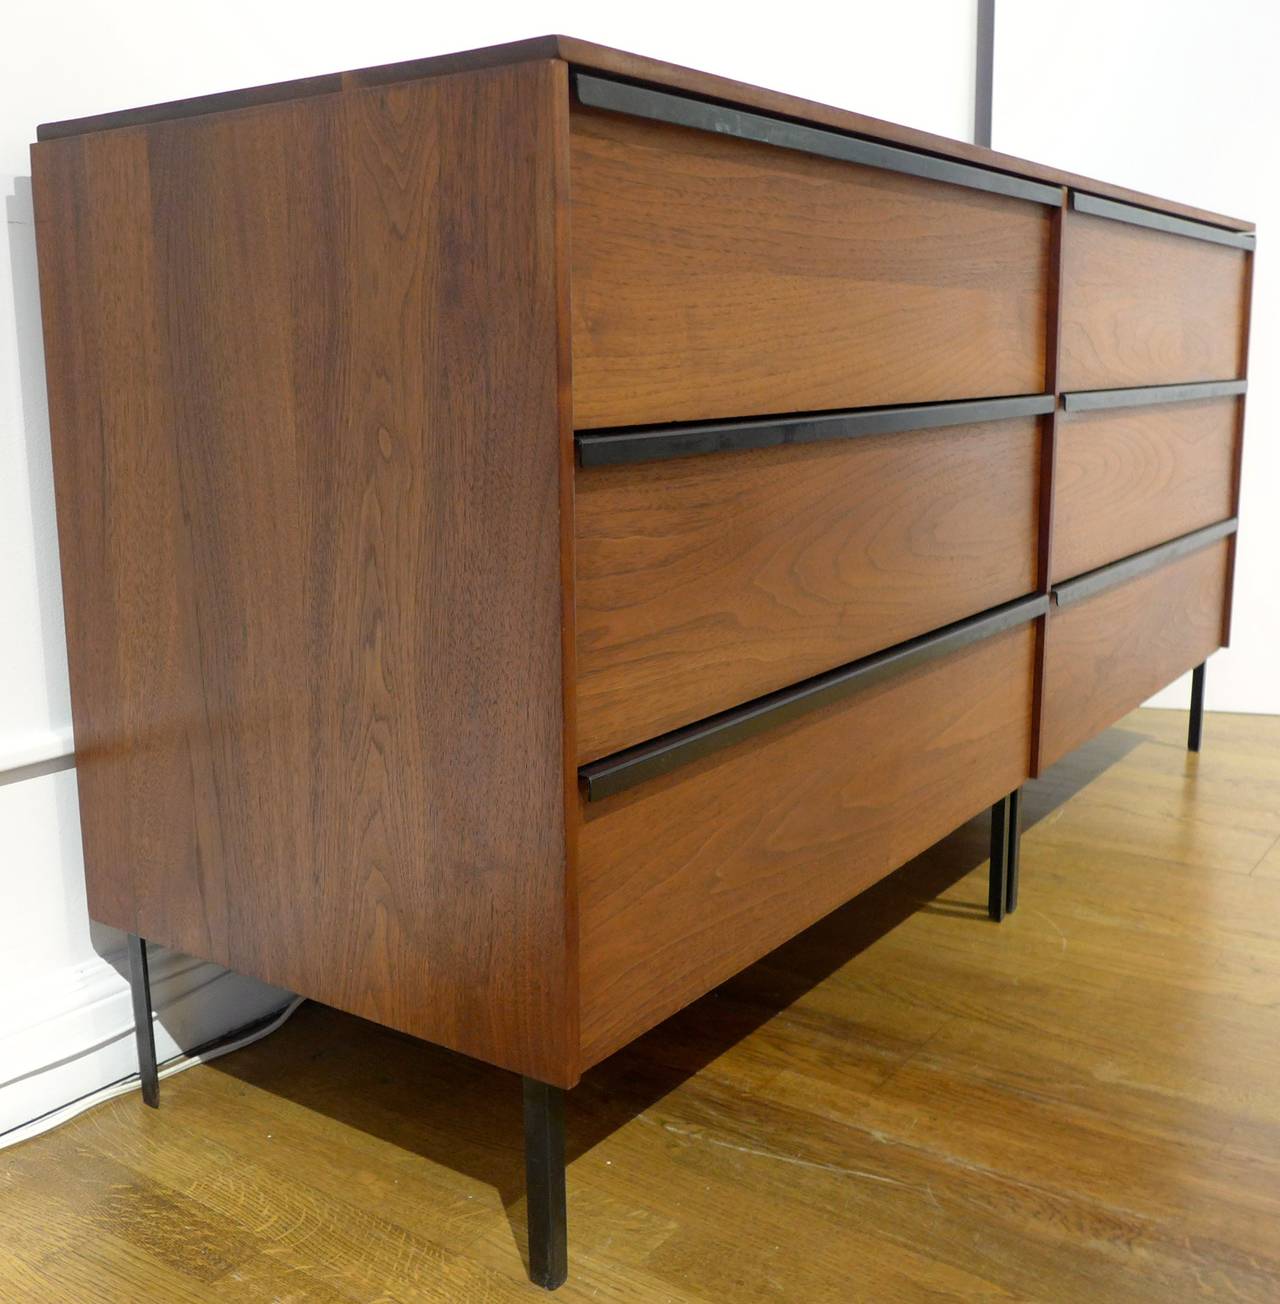 Double chest in walnut with linear steel pulls, steel angle framing, and white laminate drawer bottoms. Part of a modular series by New York City designer, teacher, and author Norman Cherner. The structural framing forms a skeleton for the